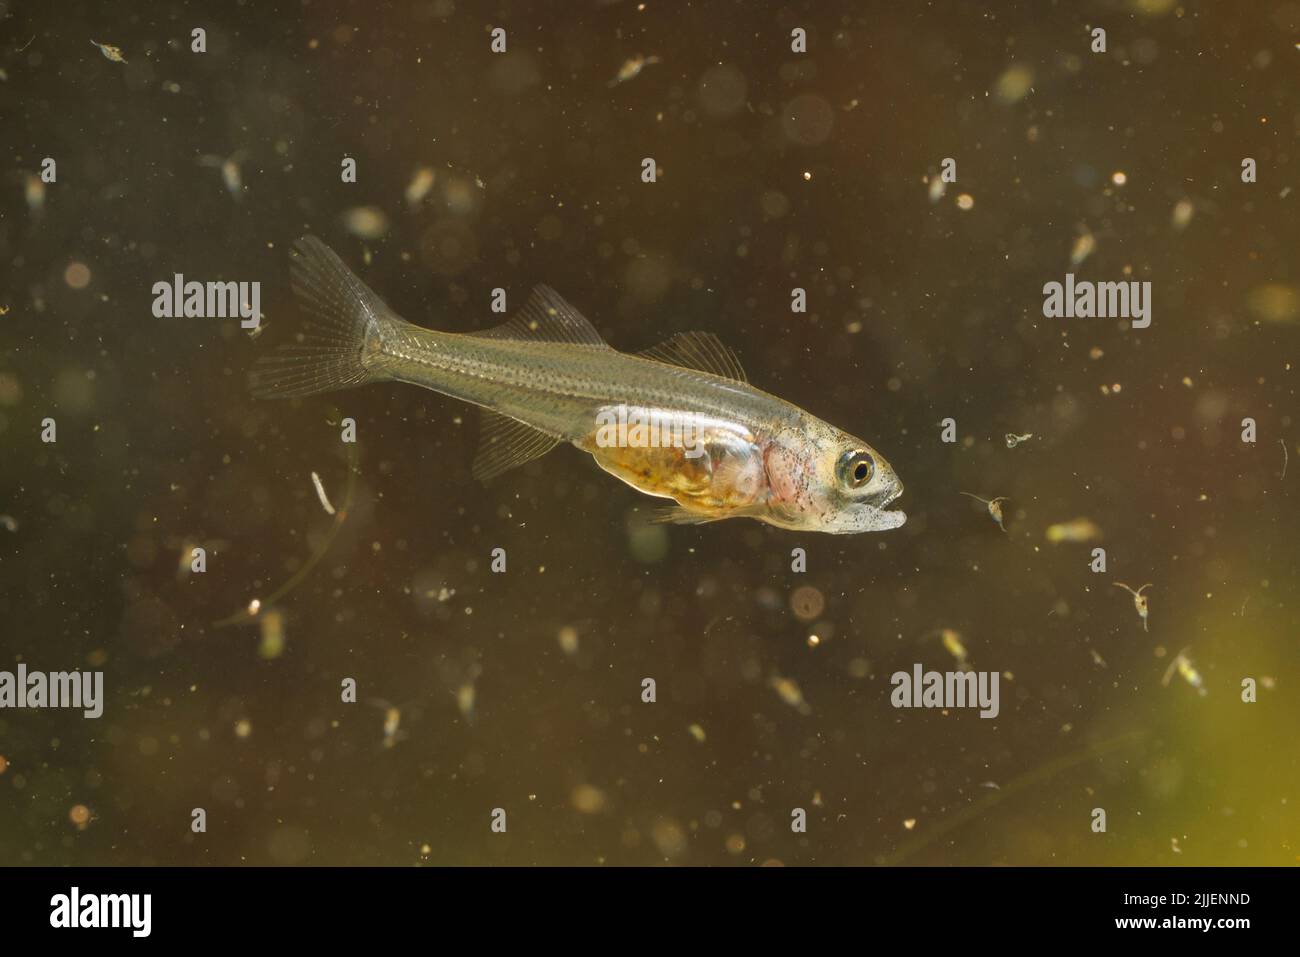 sauger (Stizostedion canadense), hunts cyclops 40 days after eggdeposition at a water temperature of 21 degree Celsius Stock Photo